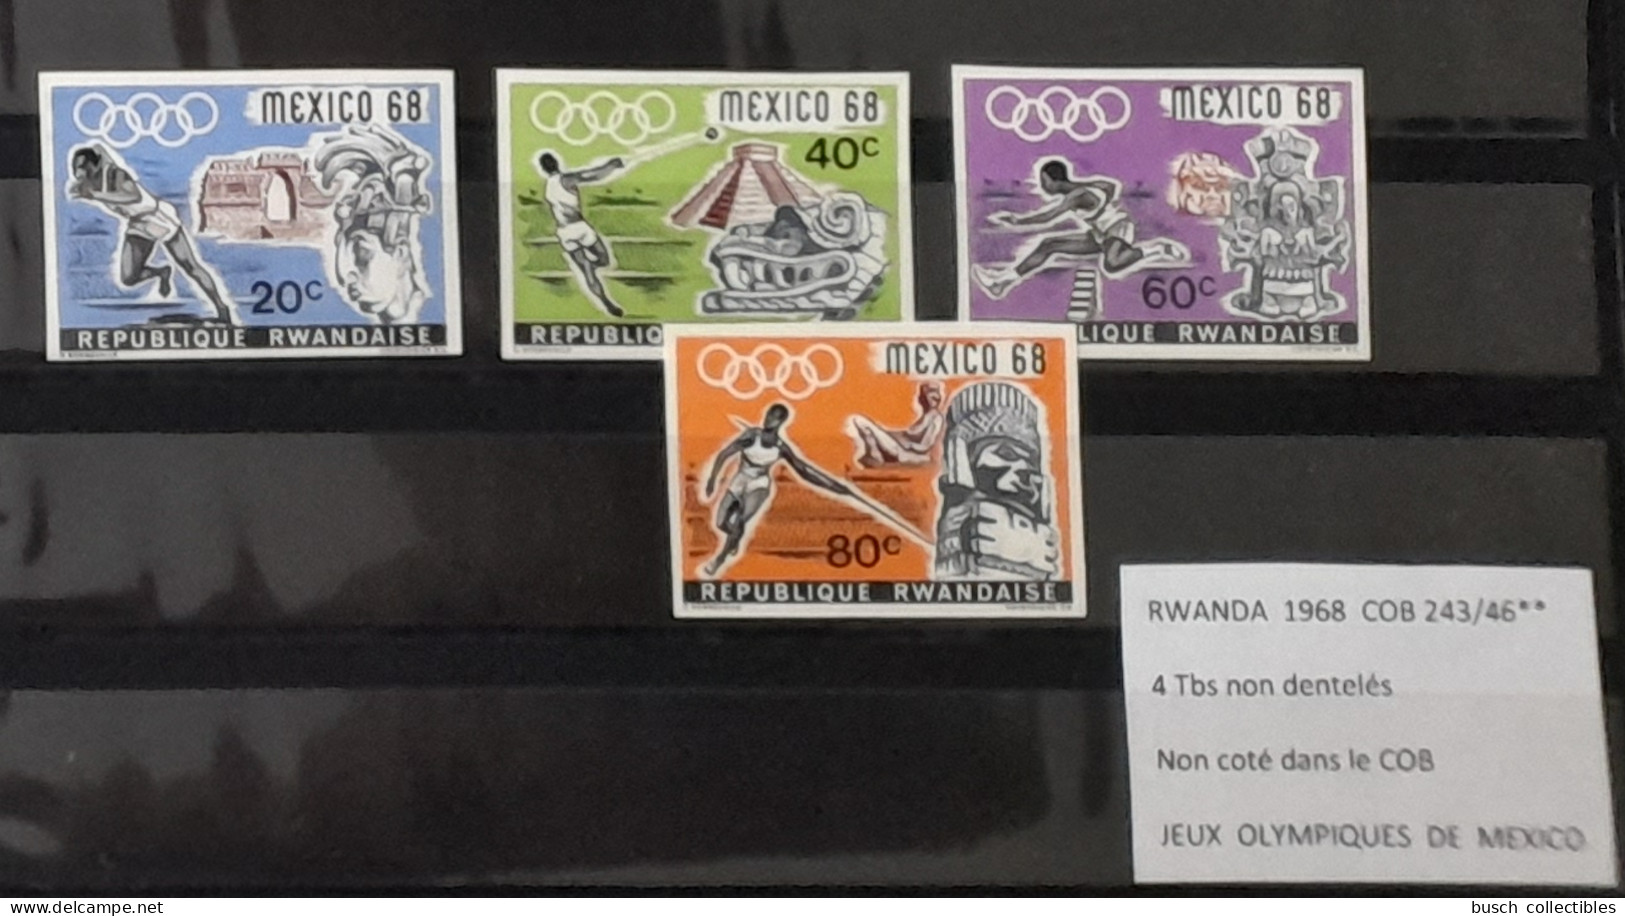 Rwanda 1968 COB 243 - 246 IMPERF Non Dentelé Jeux Olympiques Mexico Olympic Games Olympia Mexiko Sport - Unused Stamps